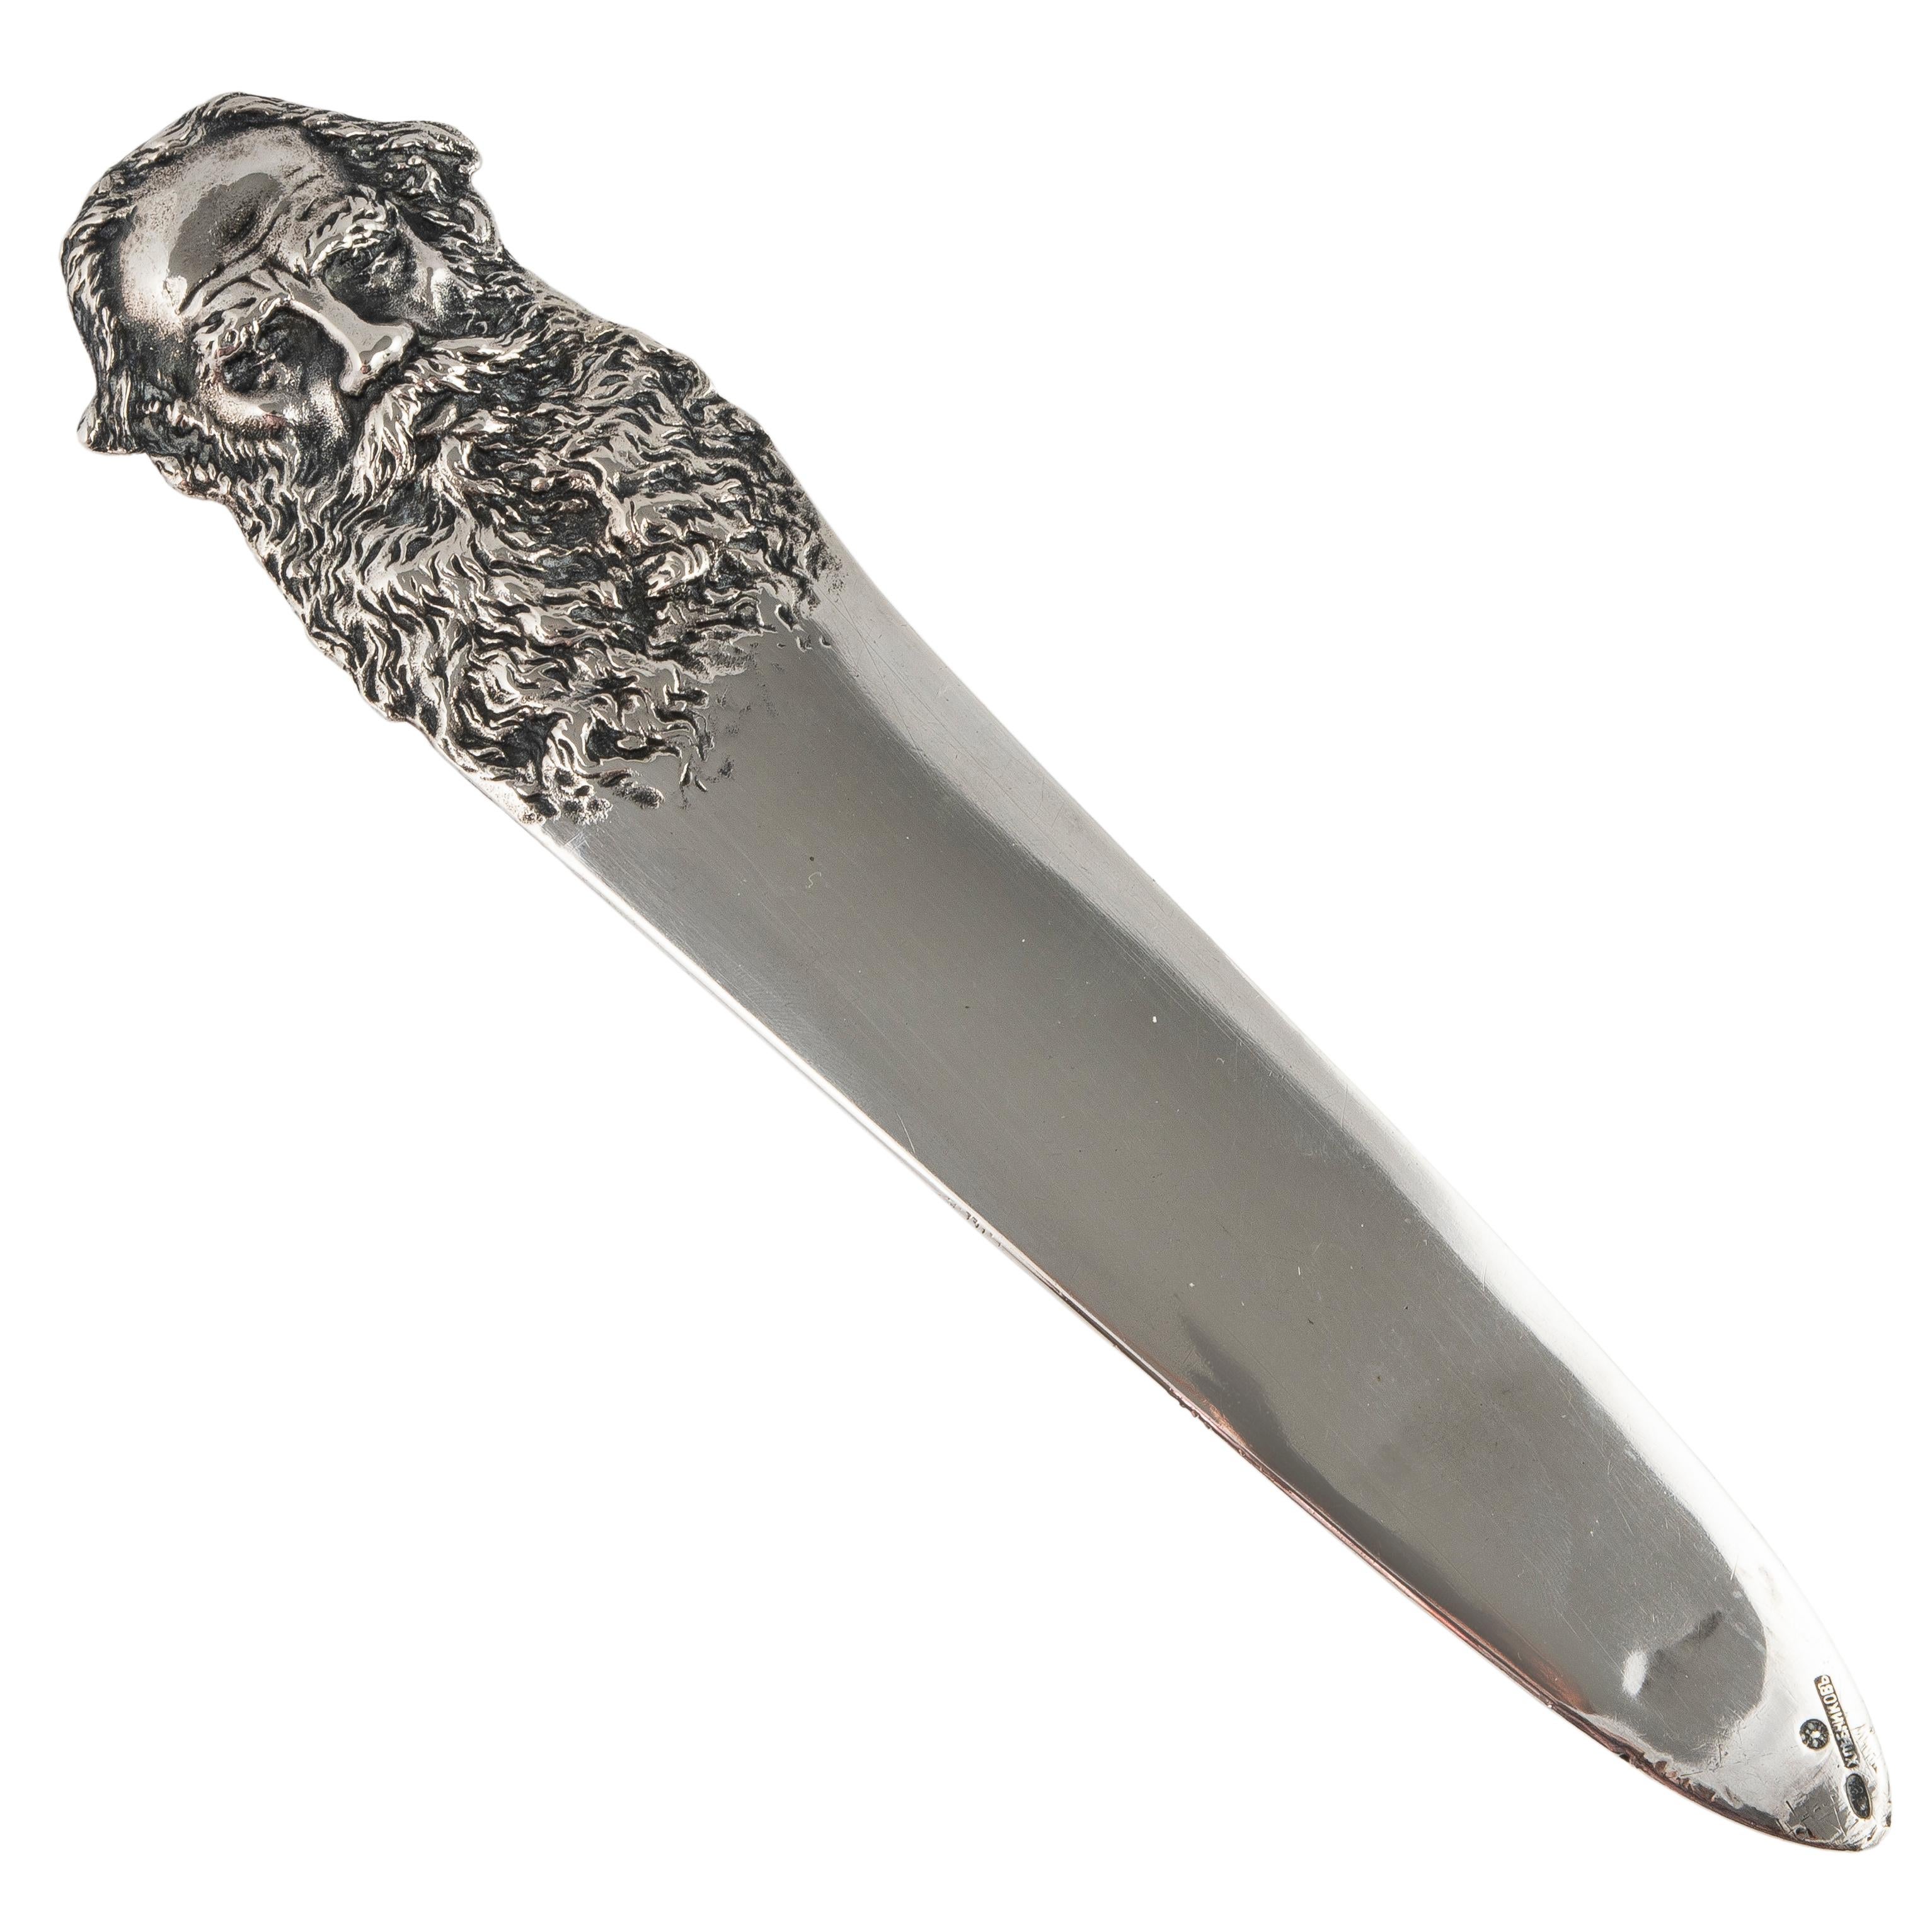 A rare Romanov-era Russian silver letter opener or paper knife from the period of Tsar Nicholas II, the handle which features a repoussé silver bust of Count Leo Tolstoy with a flowing beard is probably based on the enclosed photograph of the author